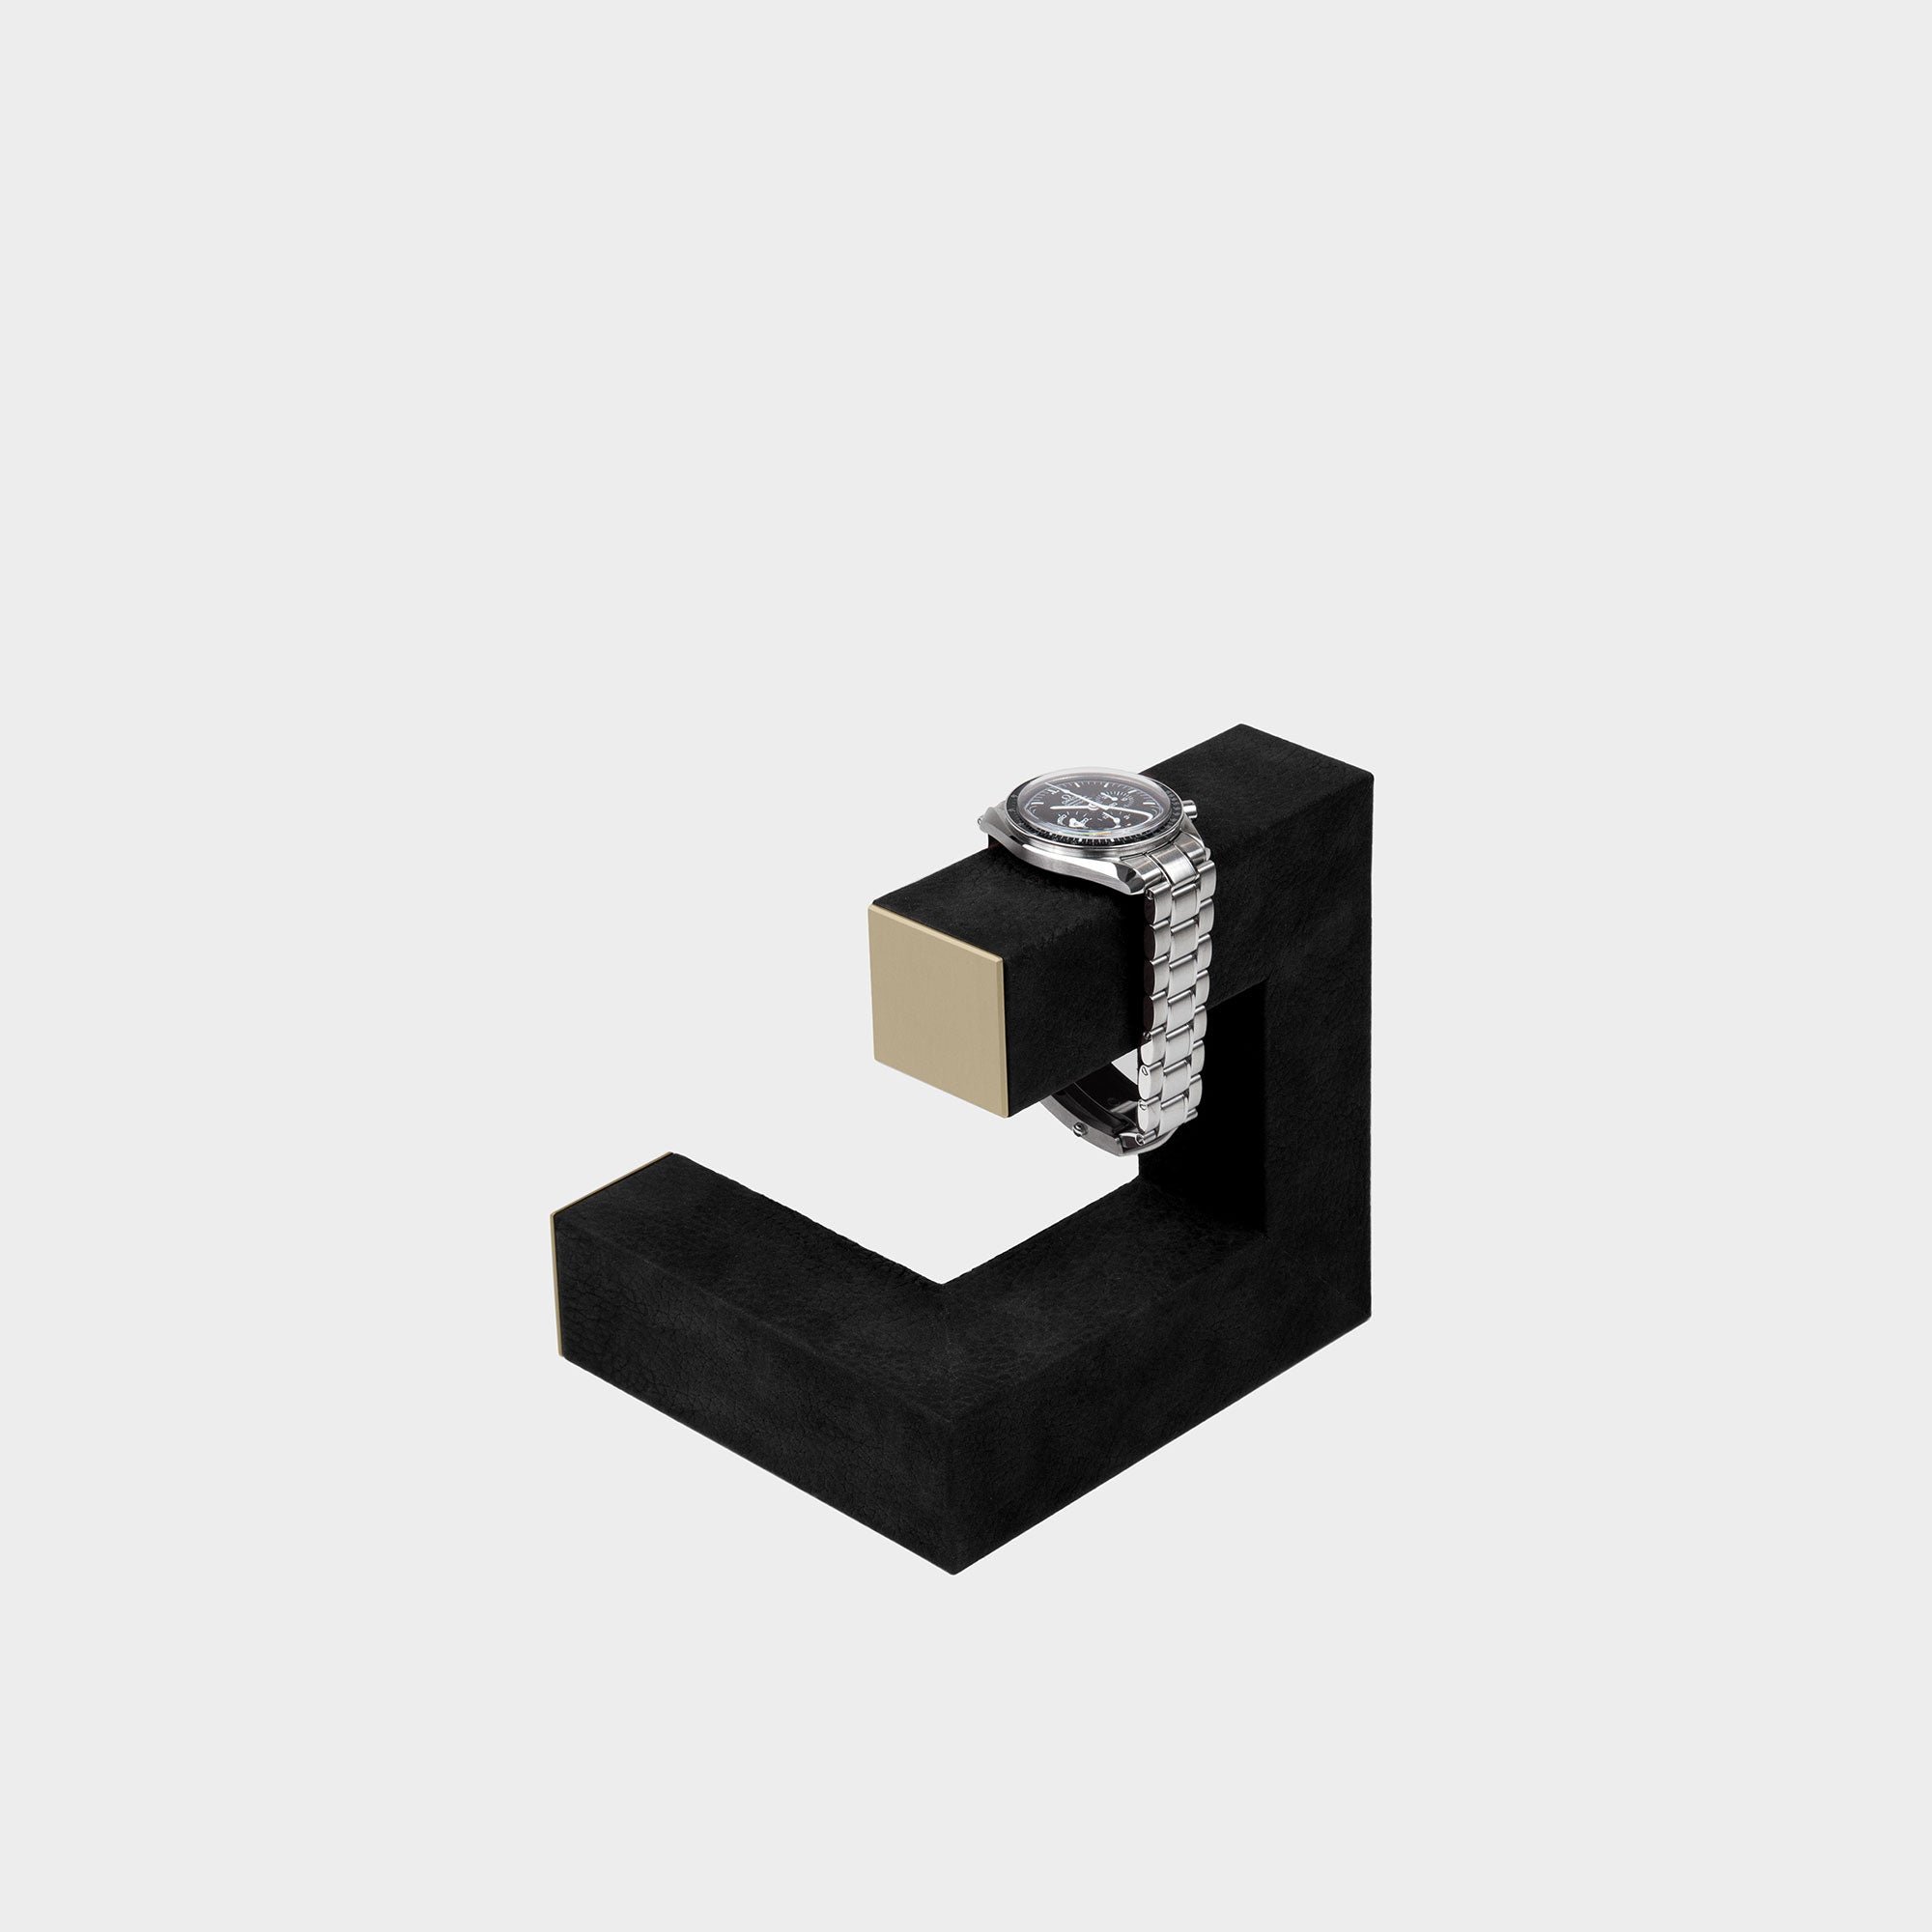 Product photo of Hudson 1 luxury watch stand in black and gold displaying 1 watch